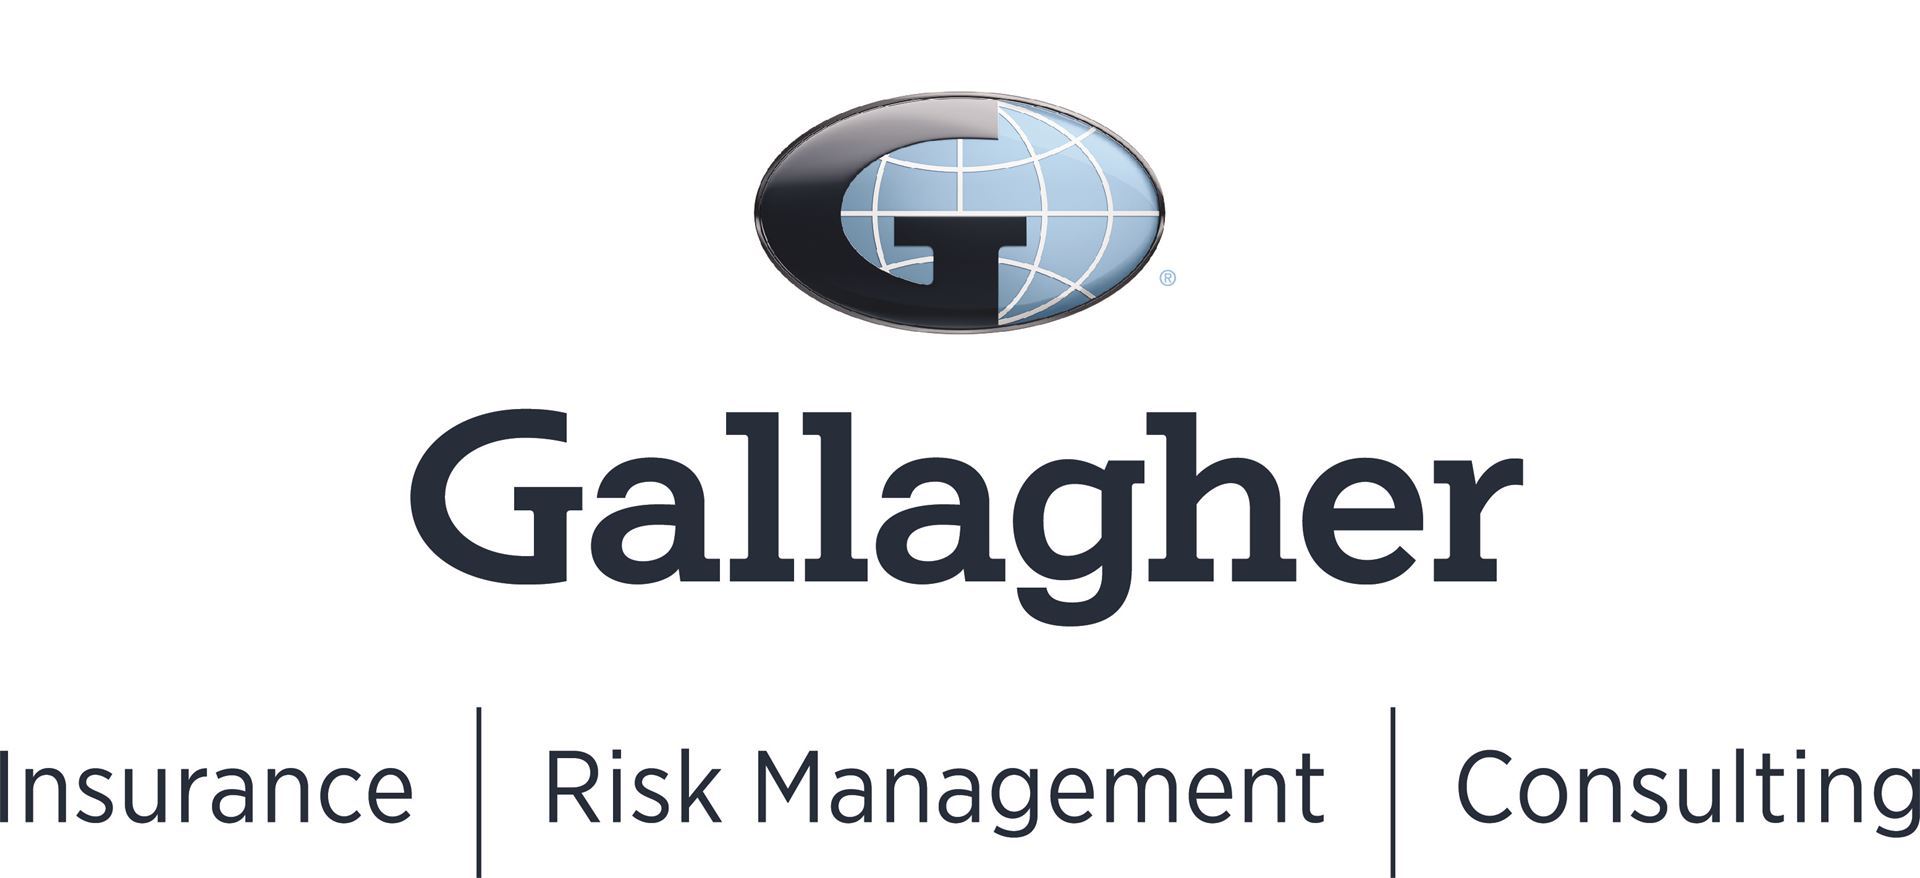 gallagher-insurance-logo-and-link